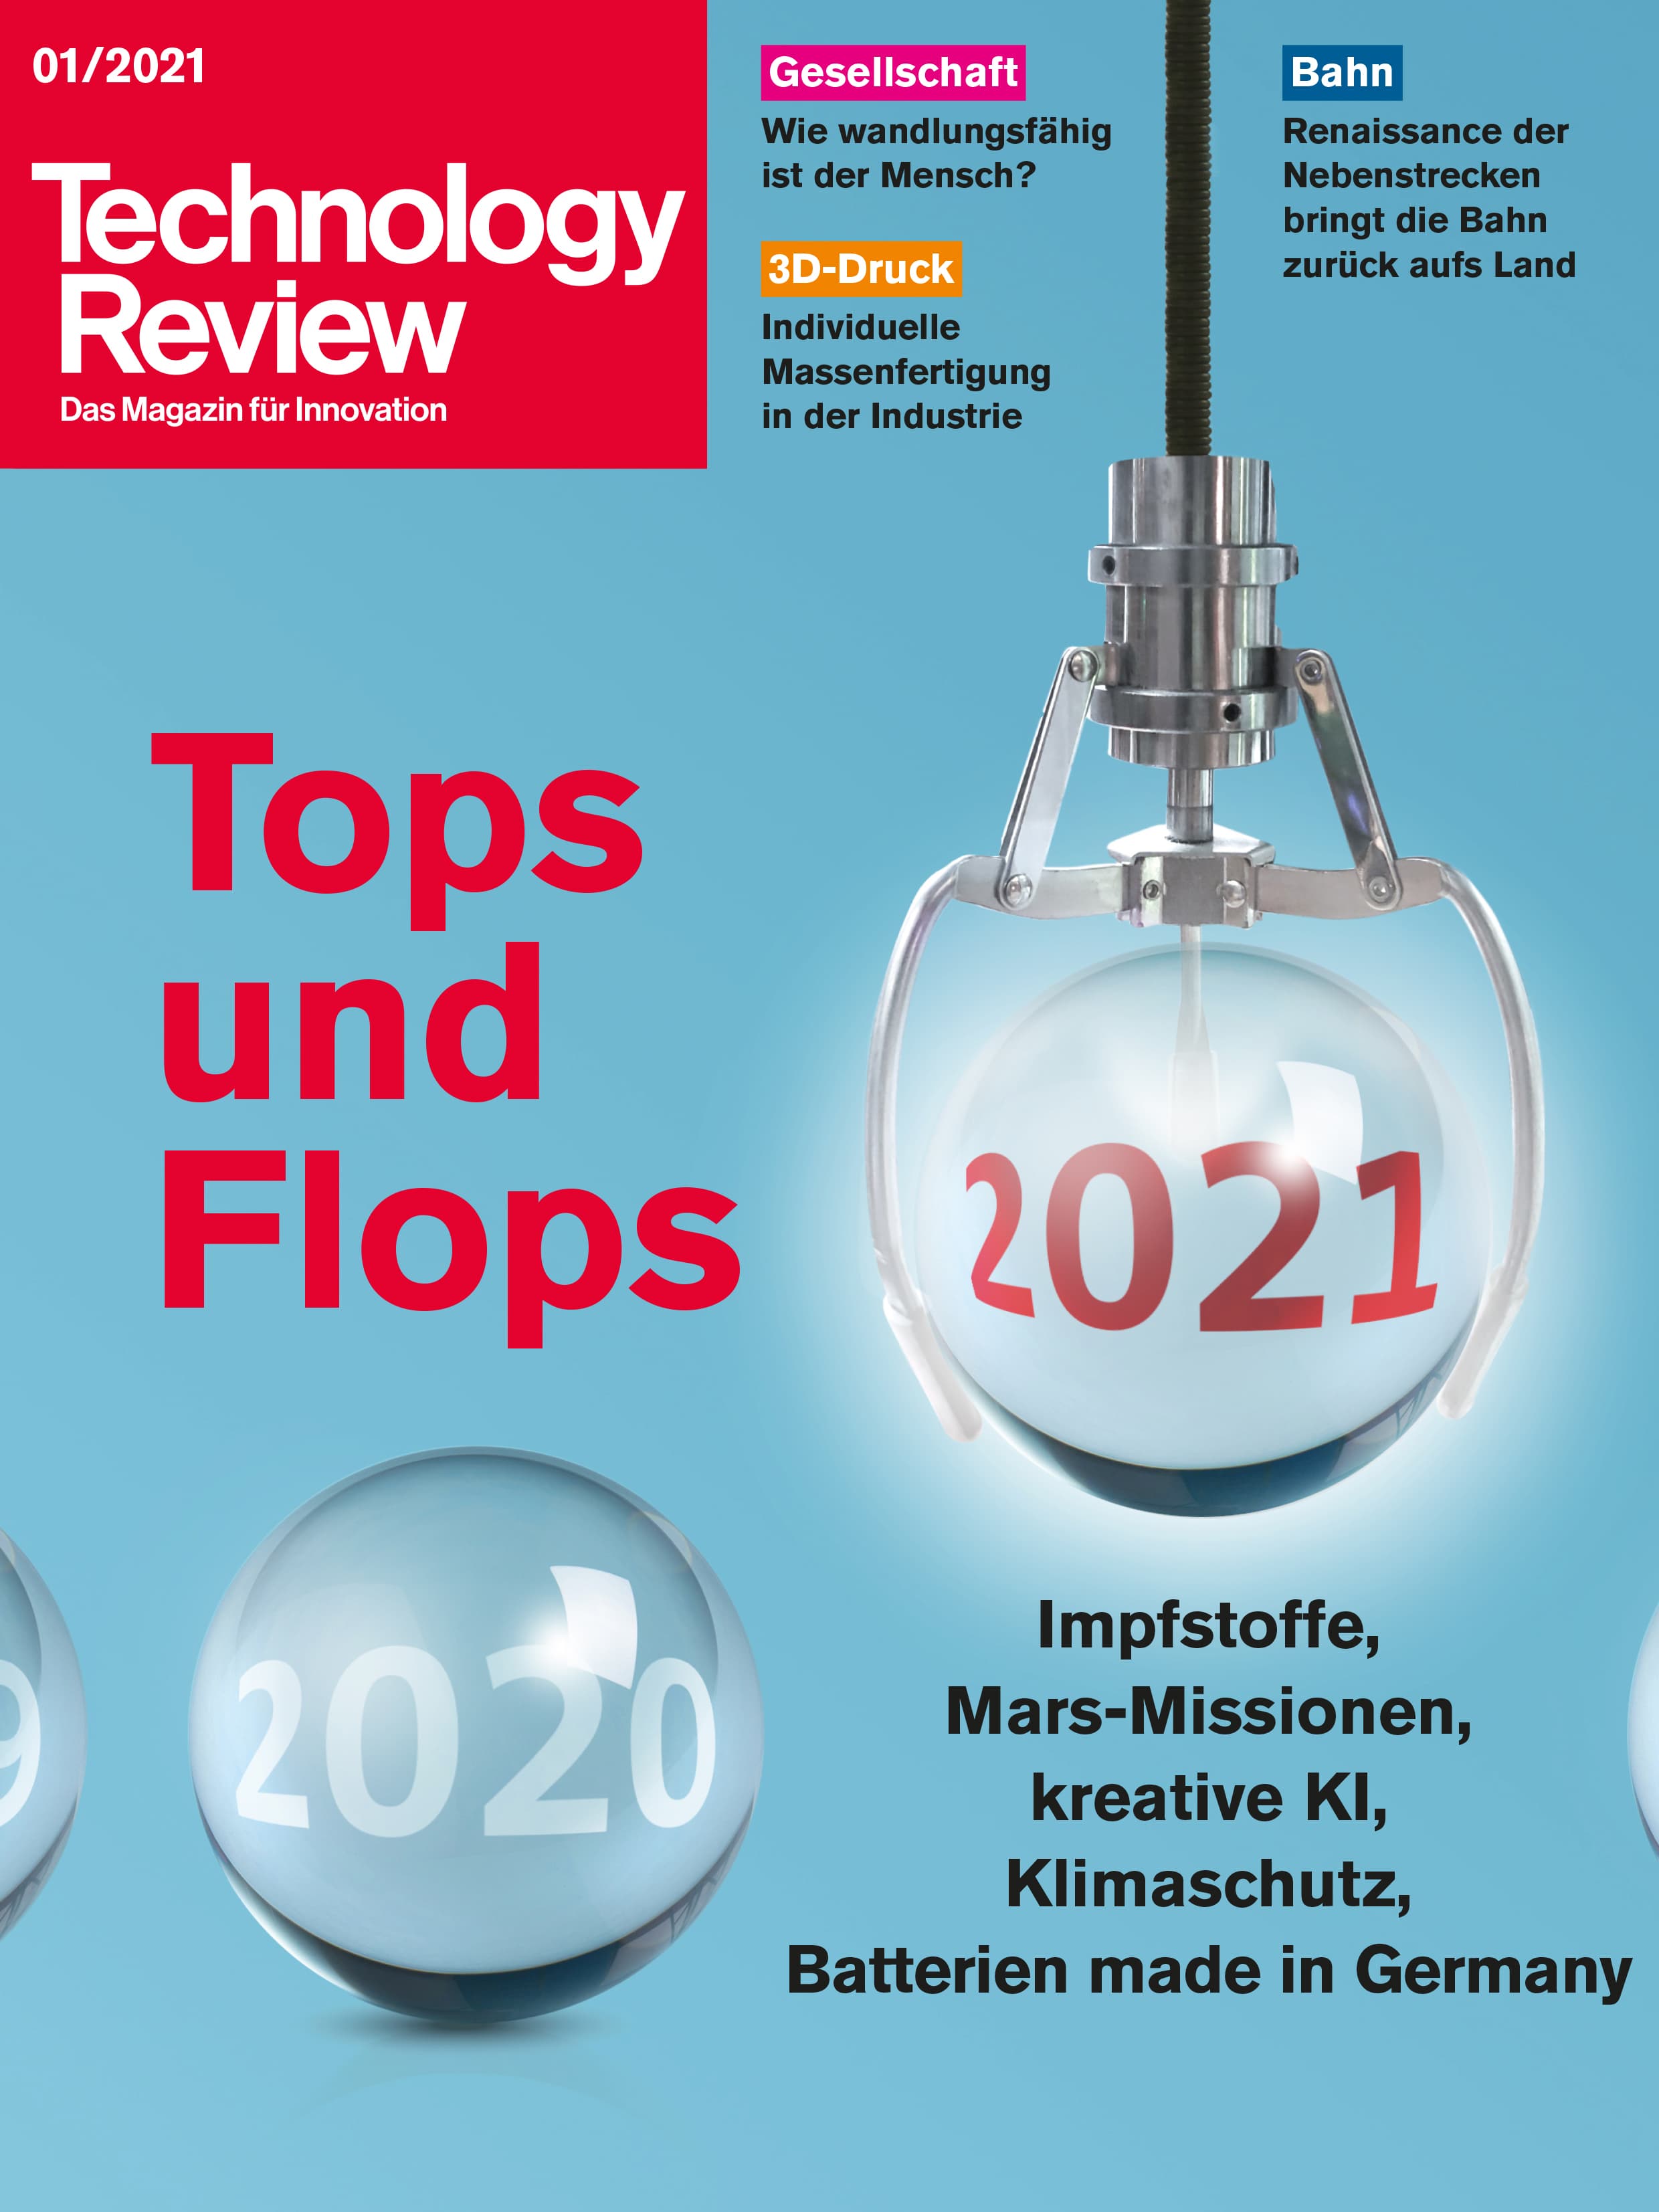 Technology Review 01/2021